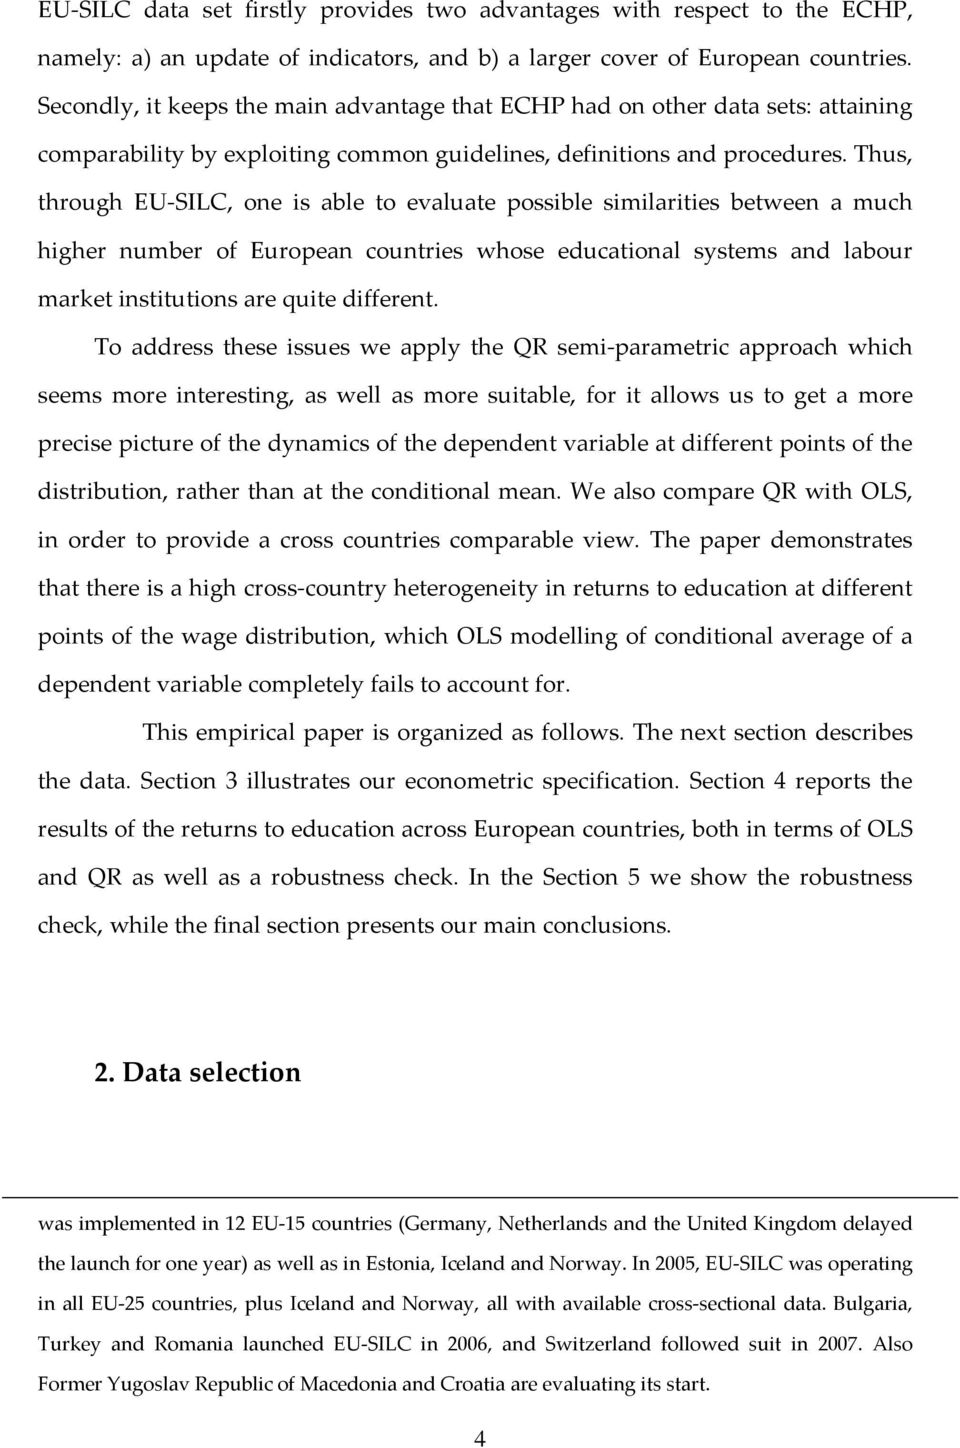 Thus, through EU SILC, one s able to evaluate possble smlartes between a much hgher number of European countres whose educatonal systems and labour market nsttutons are qute dfferent.